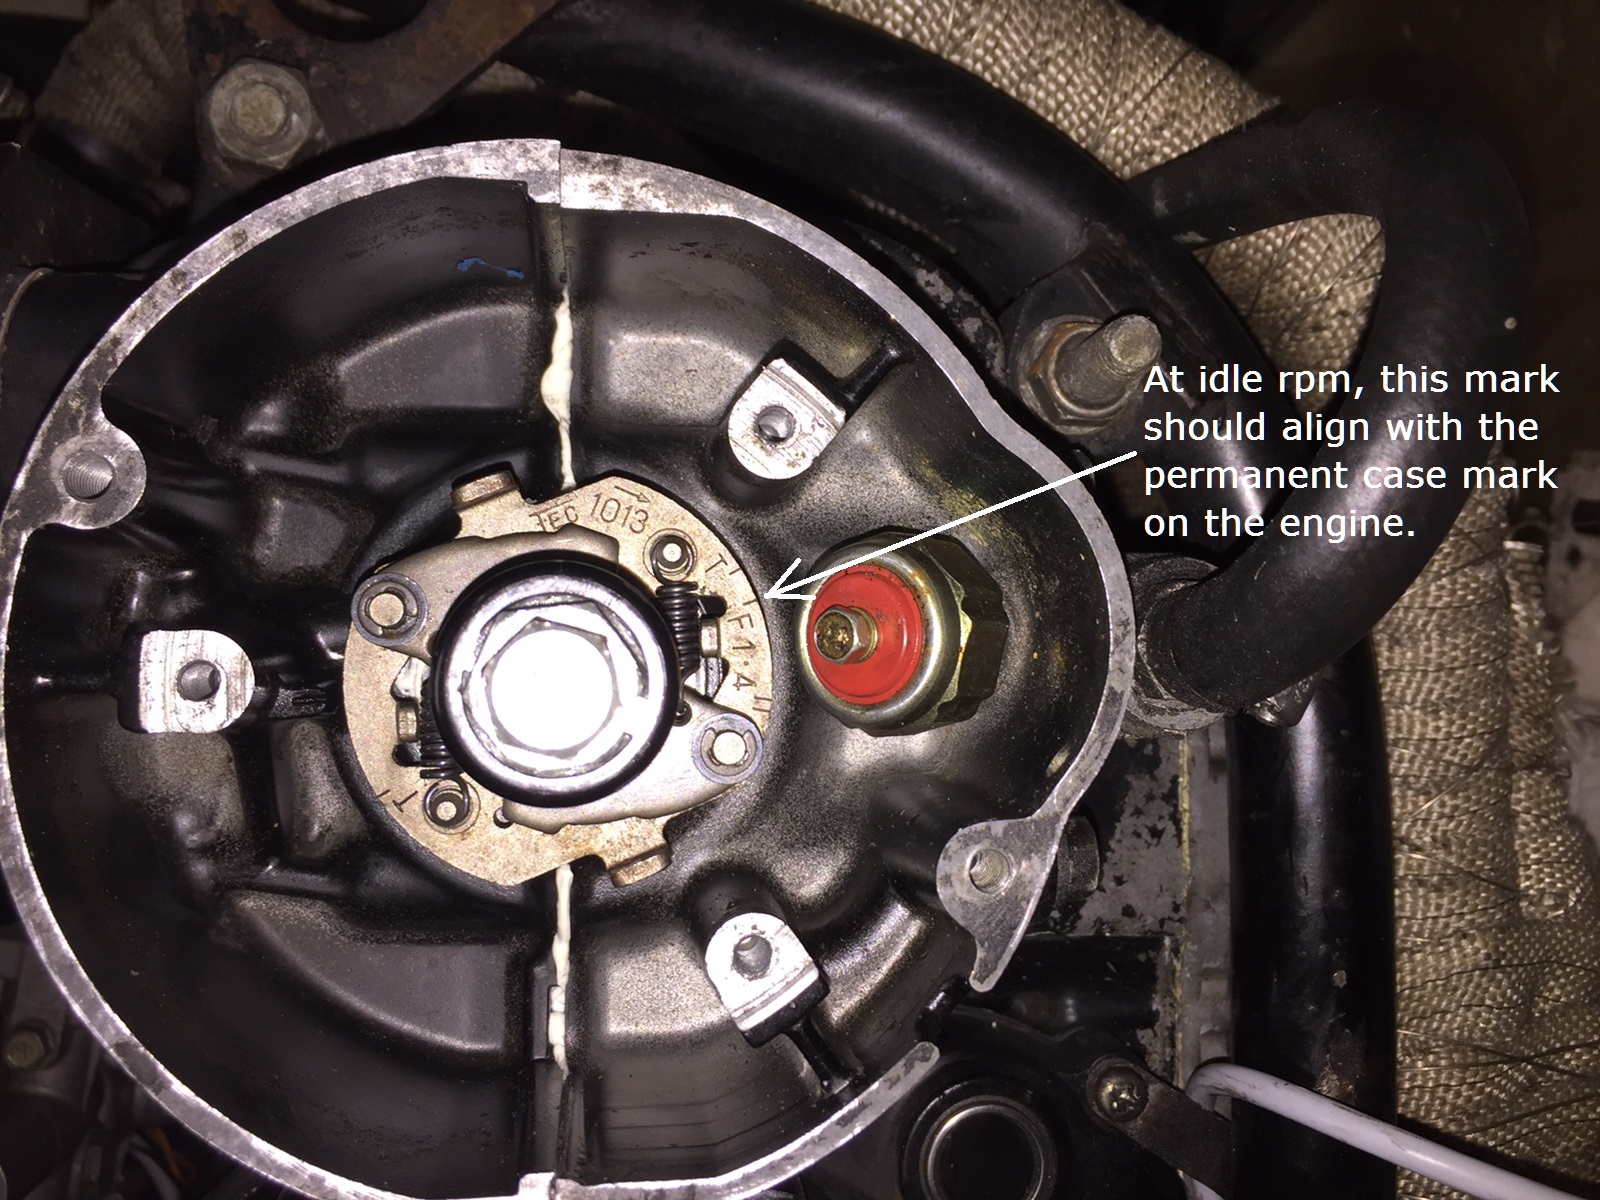 Timing with Dyna S ds2-2 and 1013 advancer - KZRider Forum KZRider, KZ, Z1 & Z Motorcycle Enthusiast's Forum